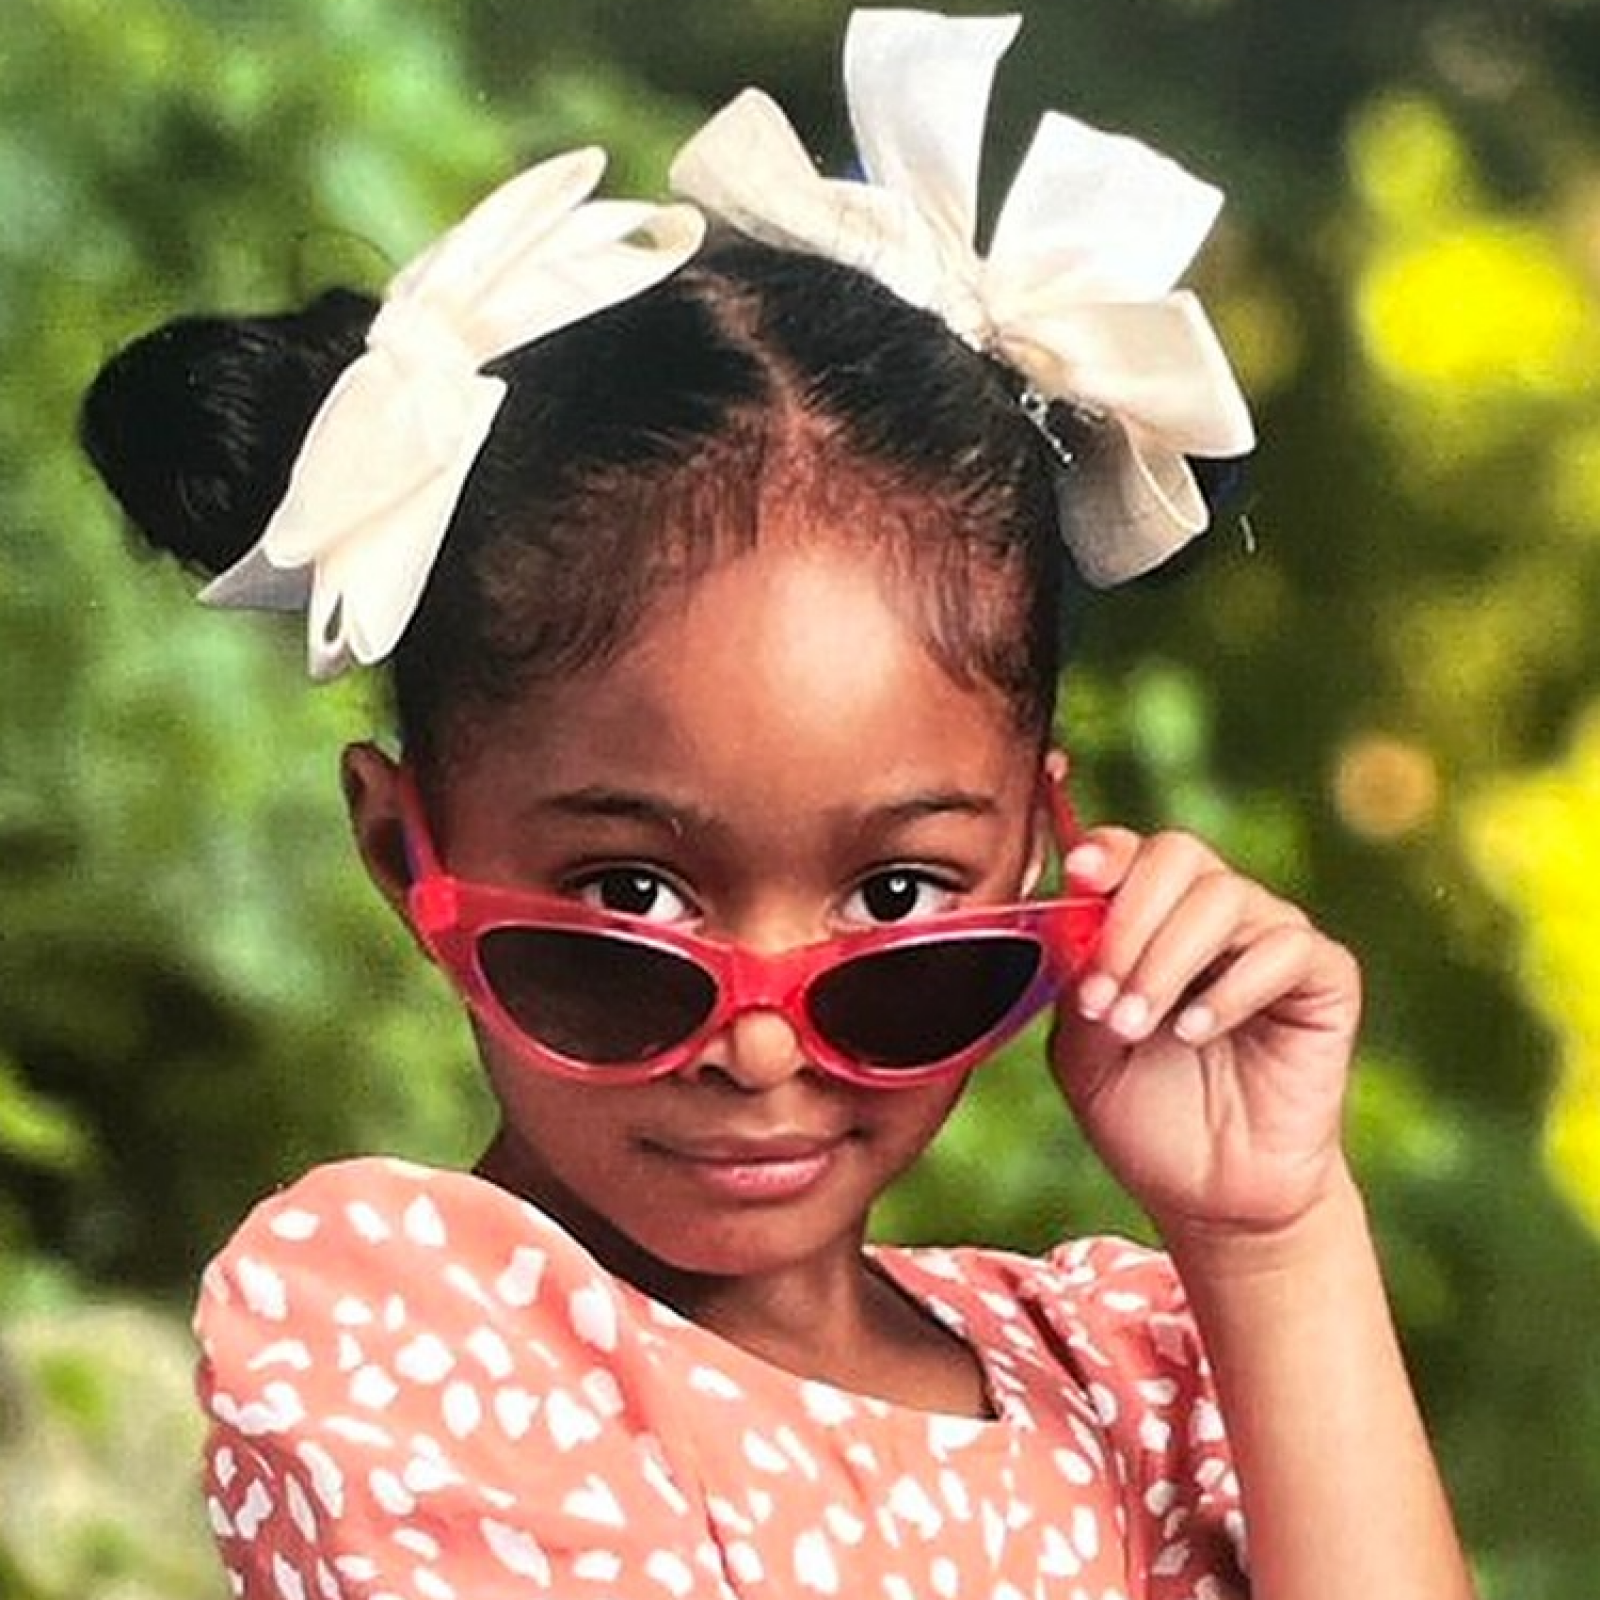 Confidence': Little Girl's Hilarious School Picture Delights Internet